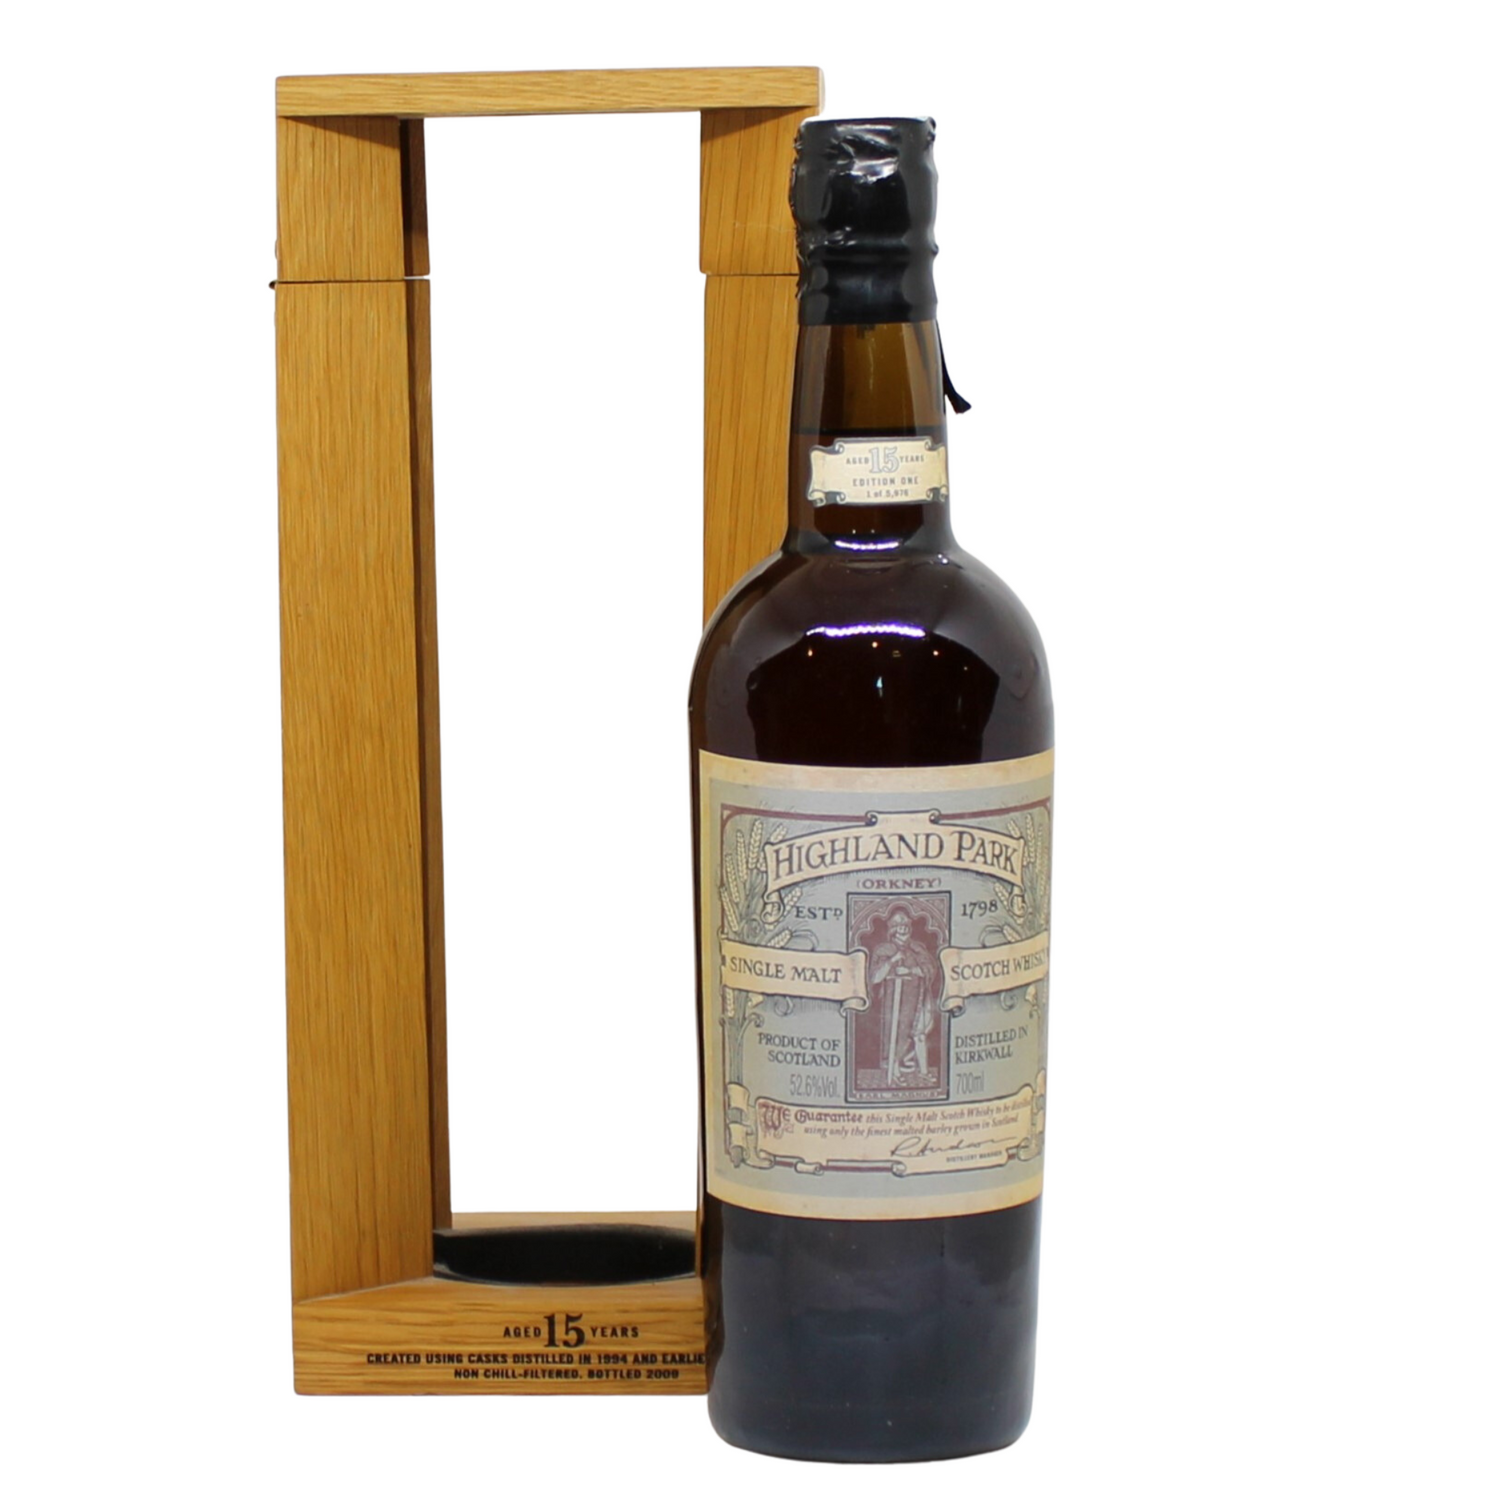 Earl Magnus is a 15 year old cask strength whisky, and which was awarded the top prize in its category at the World Whisky Awards. 5976 bottles were released.